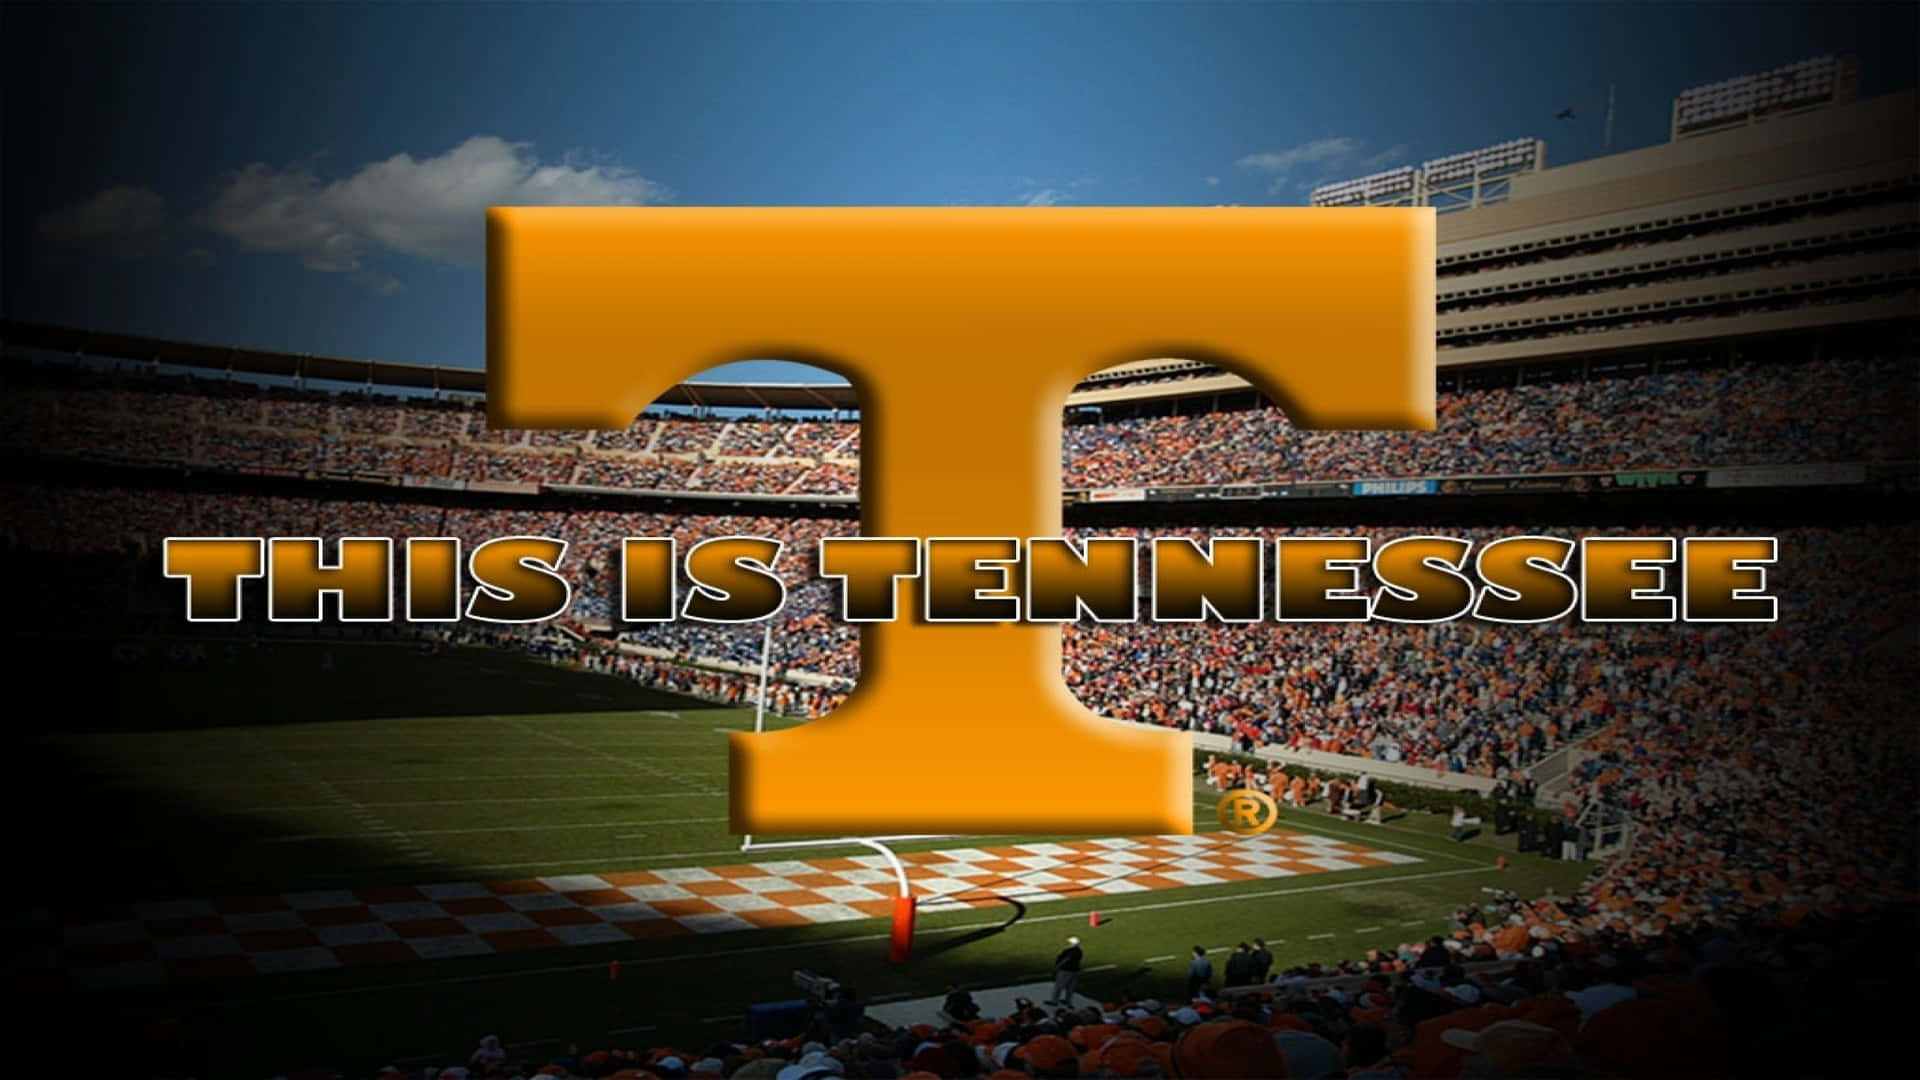 The Tennessee Volunteers are a force to be reckoned with. Wallpaper